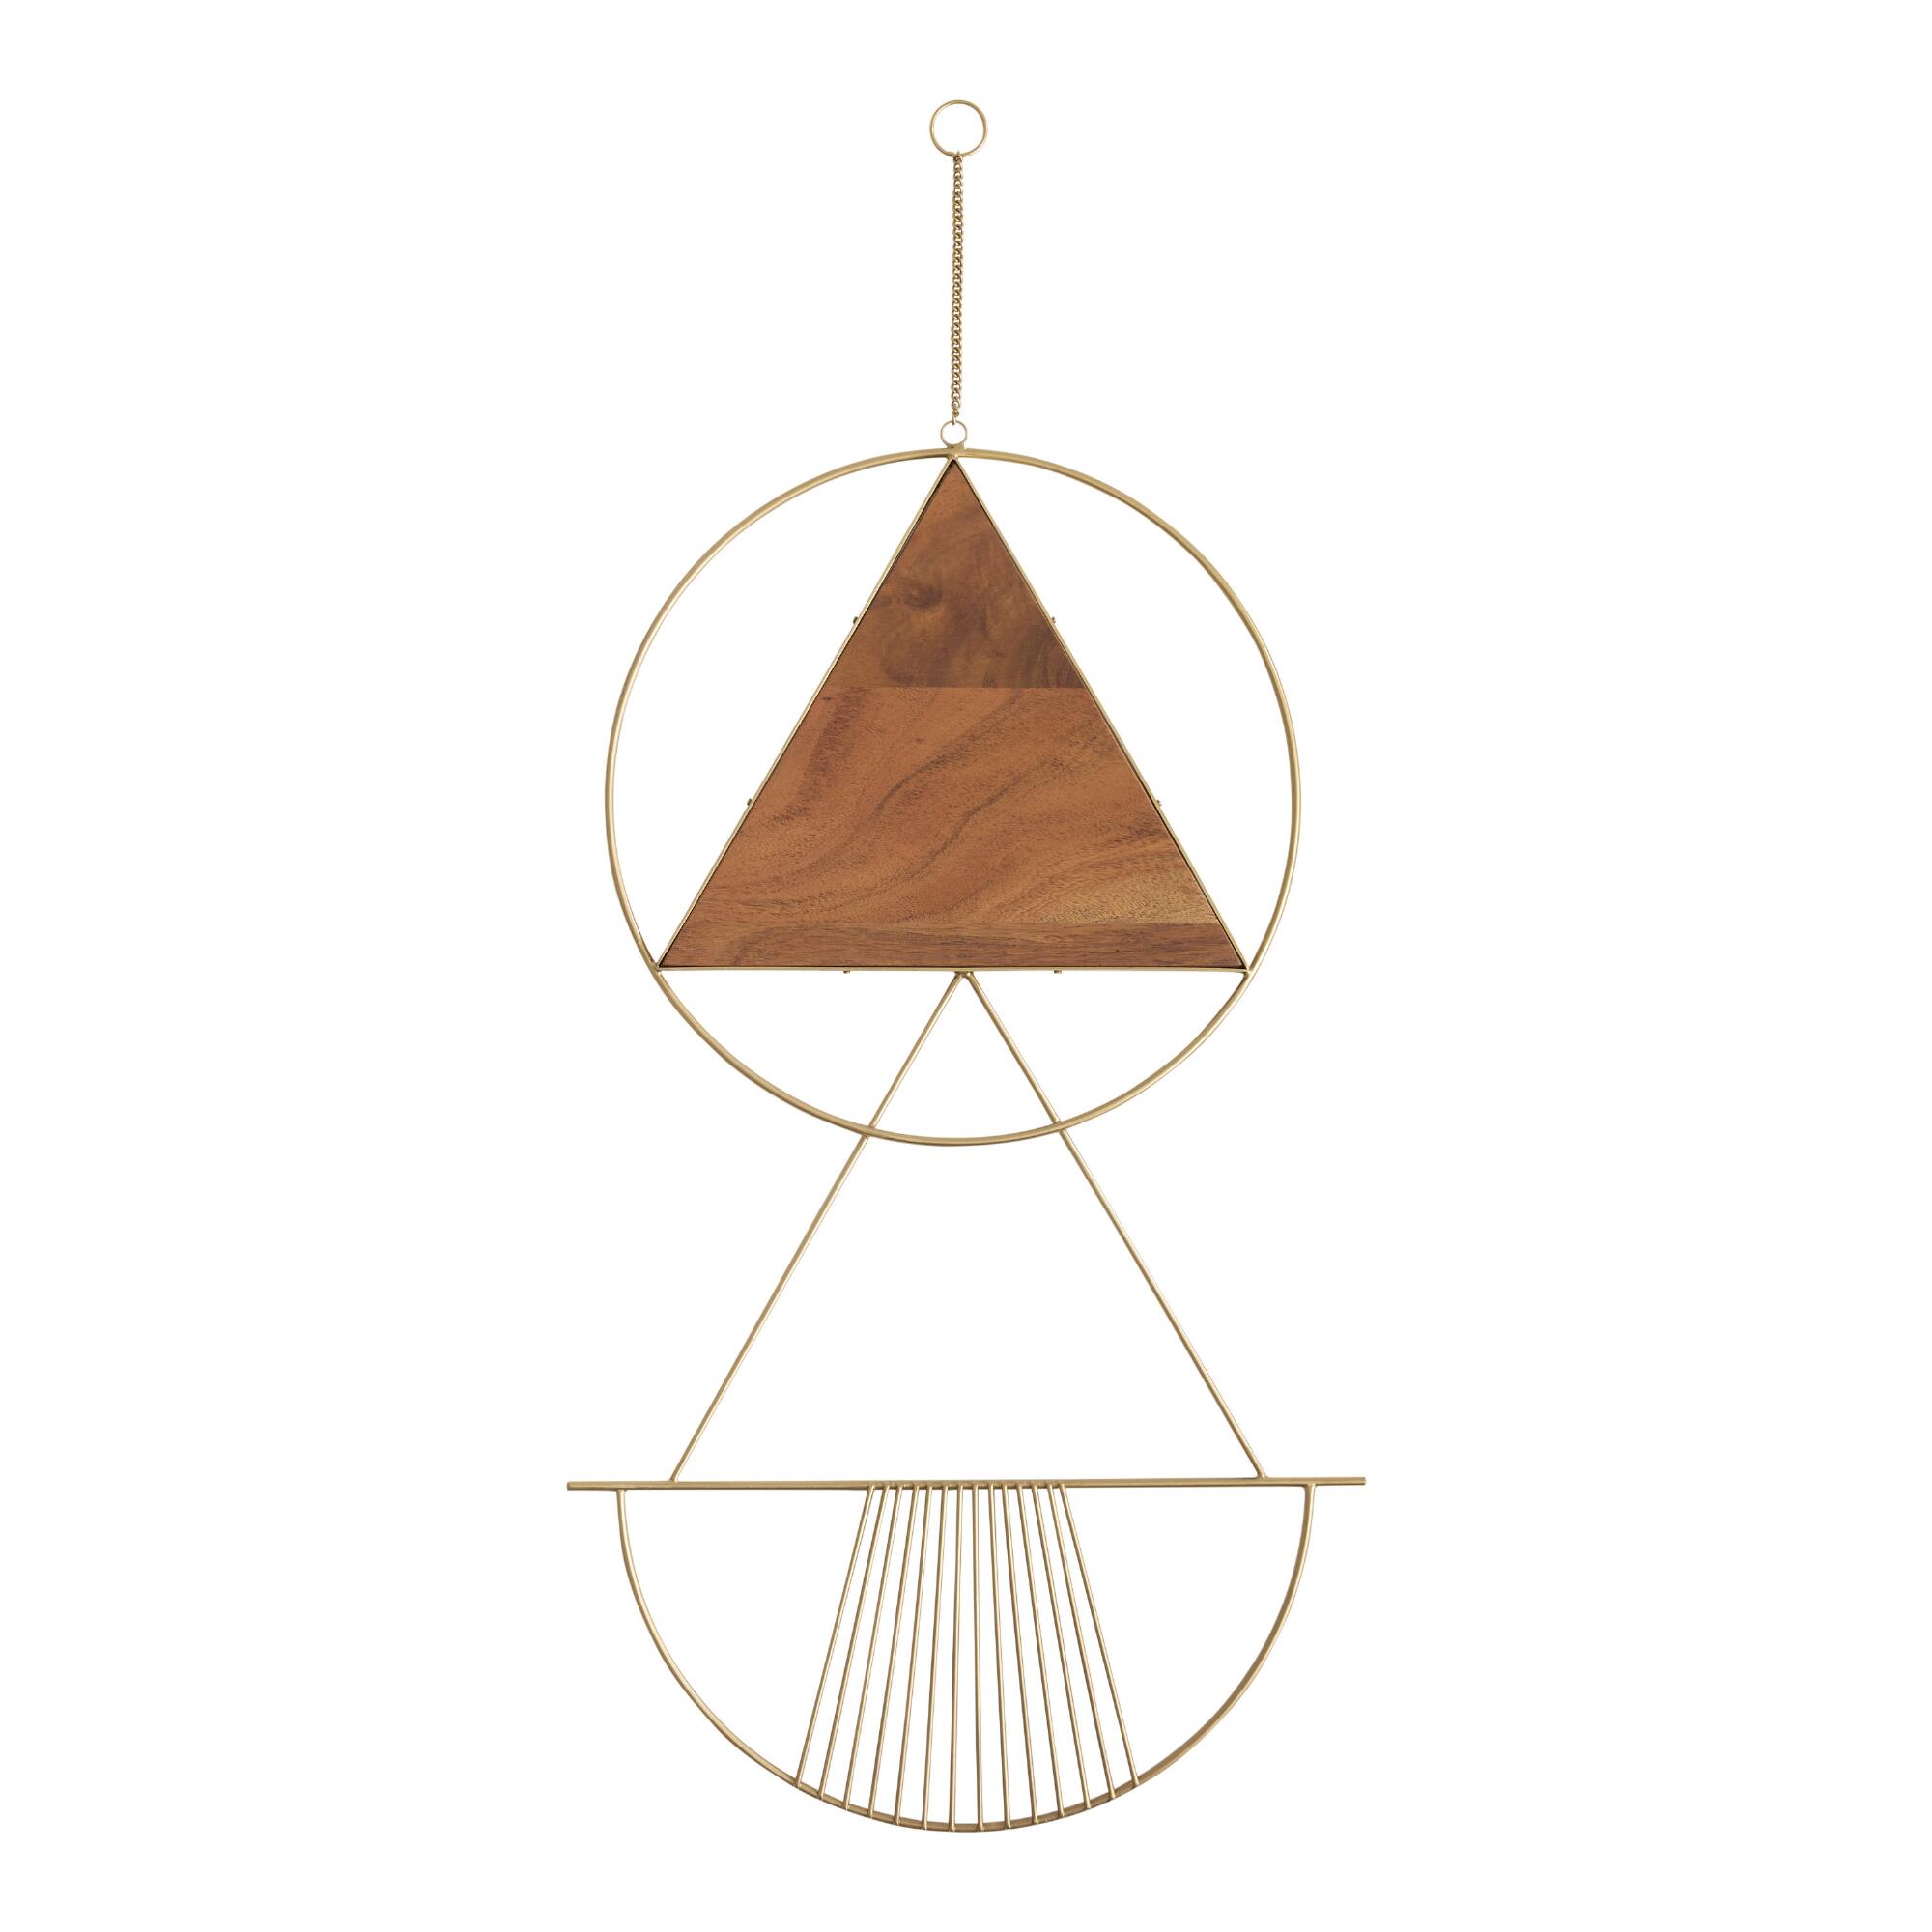 Gold Metal and Wood Geo Celeste Wall Hanging by World Market